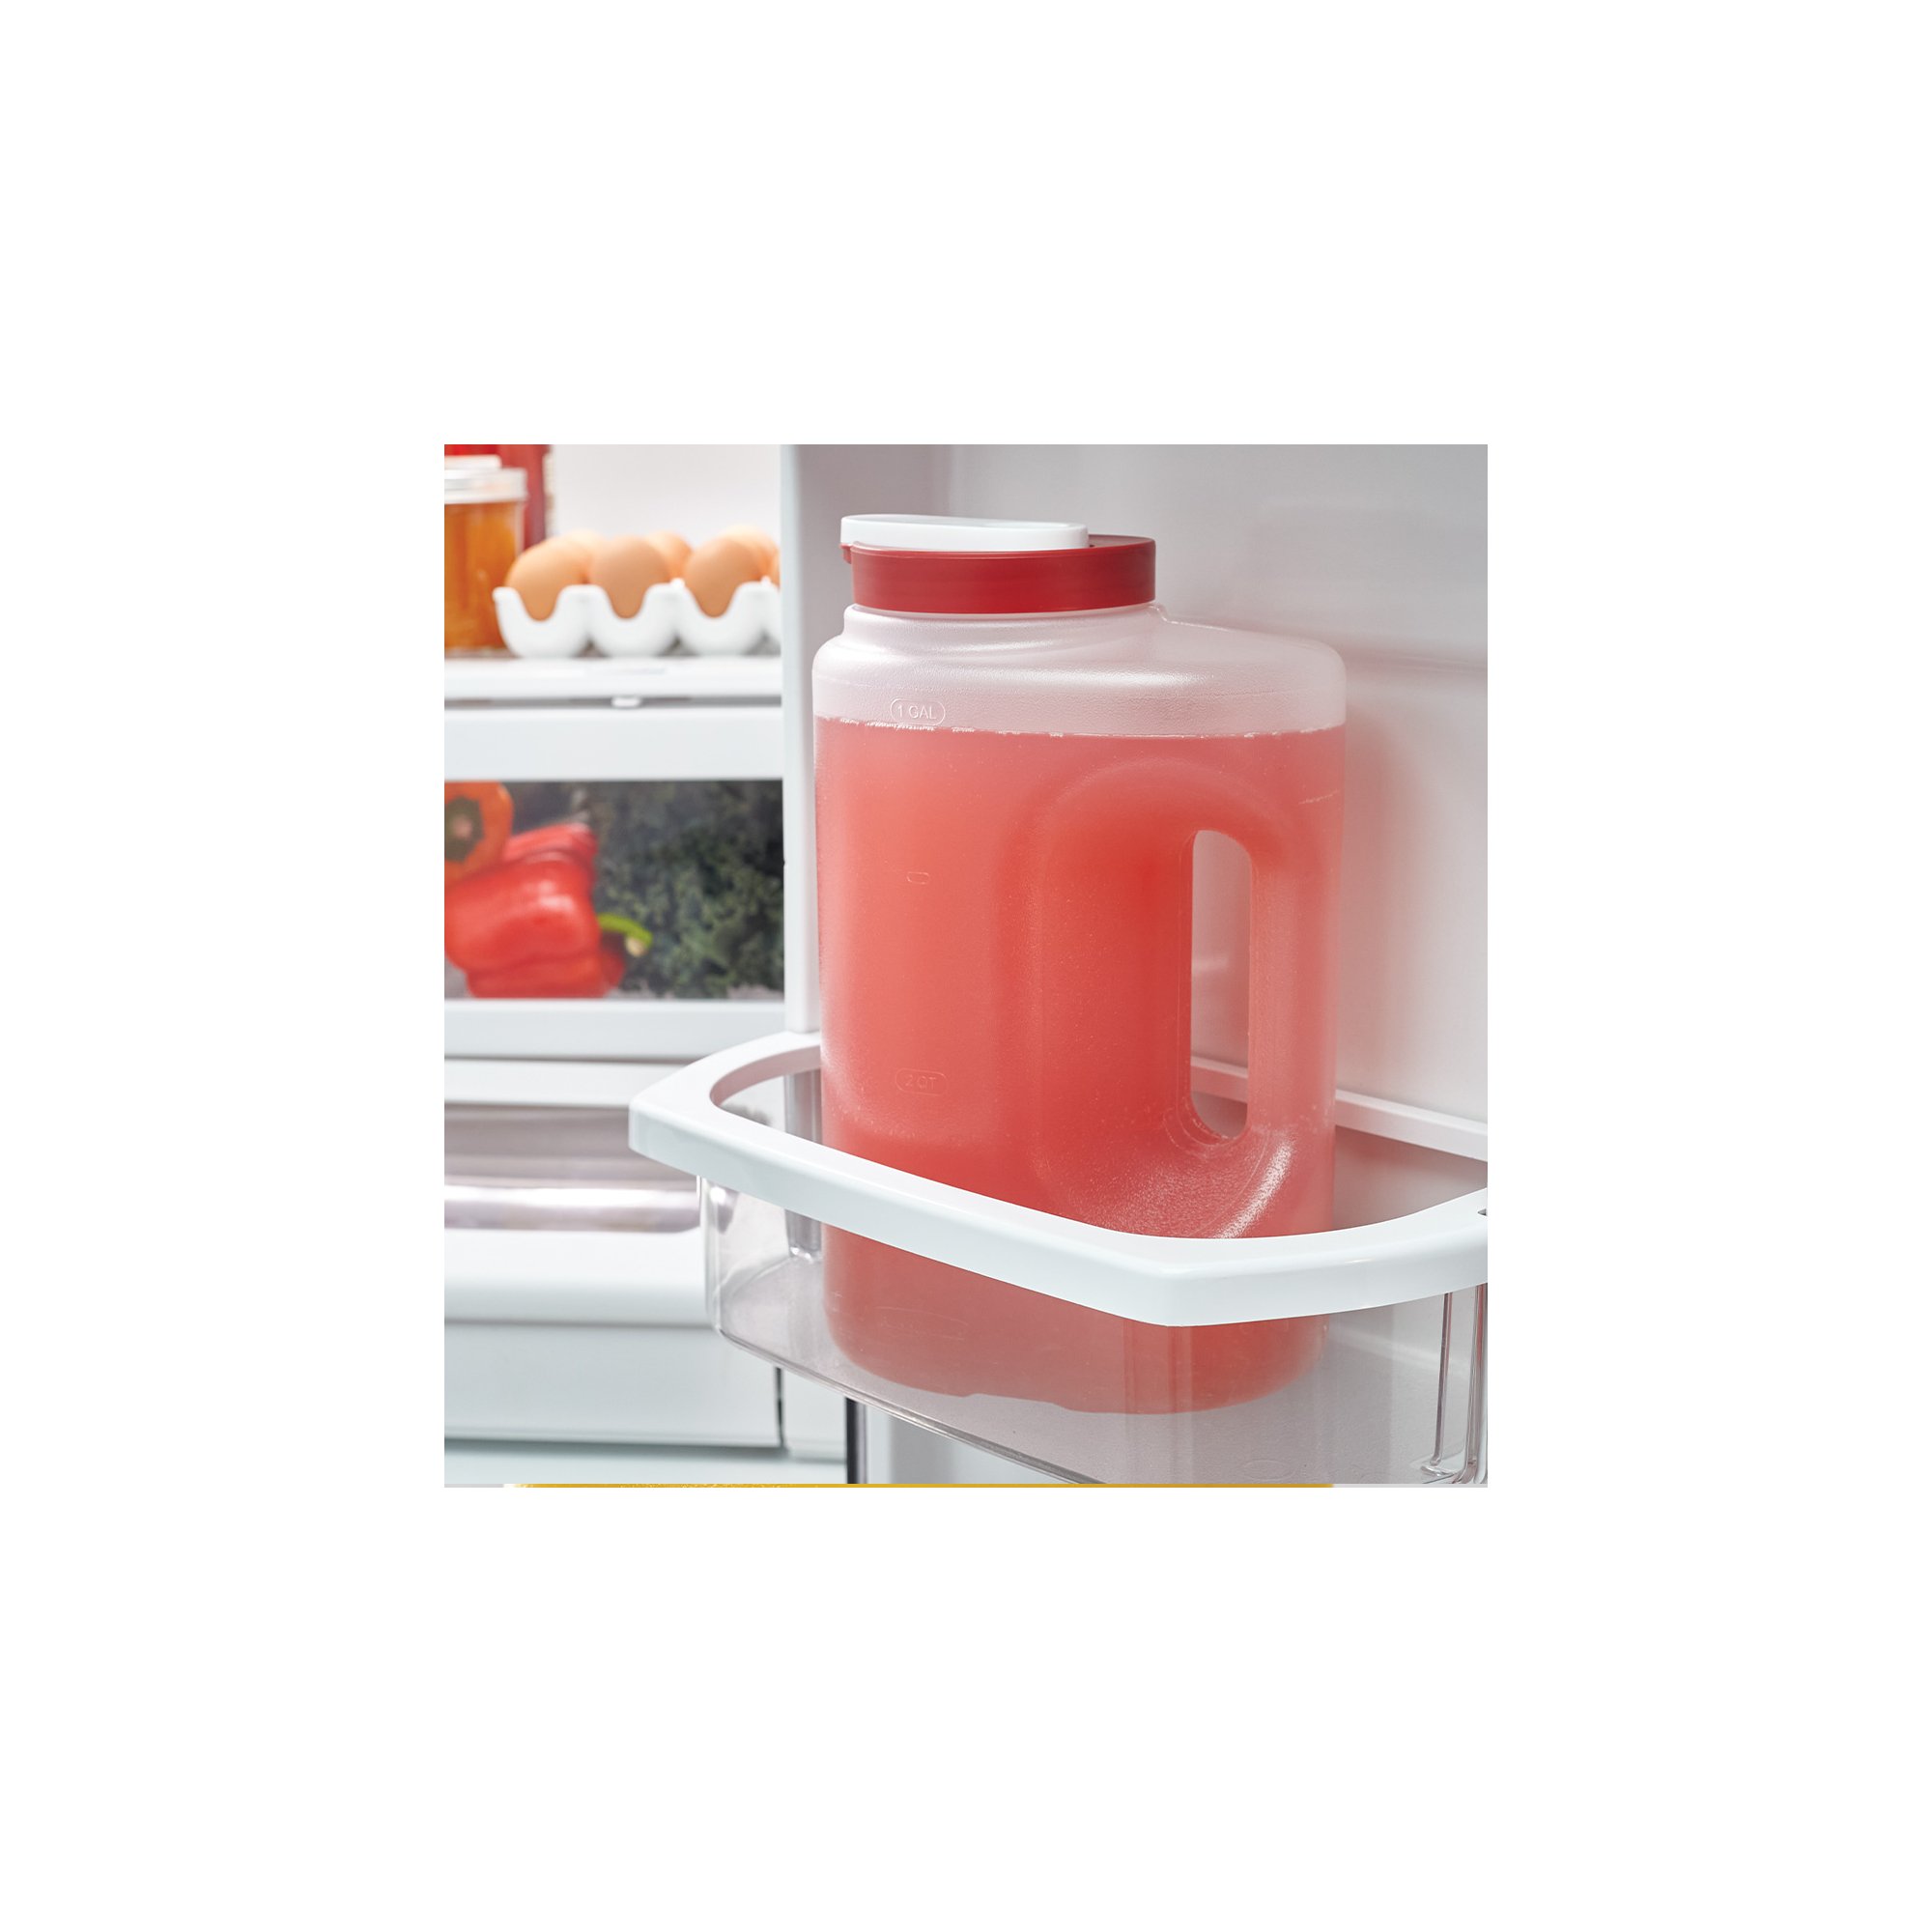 Rubbermaid 2122603 MixerMate 2 Quart Pitcher with Red Lid